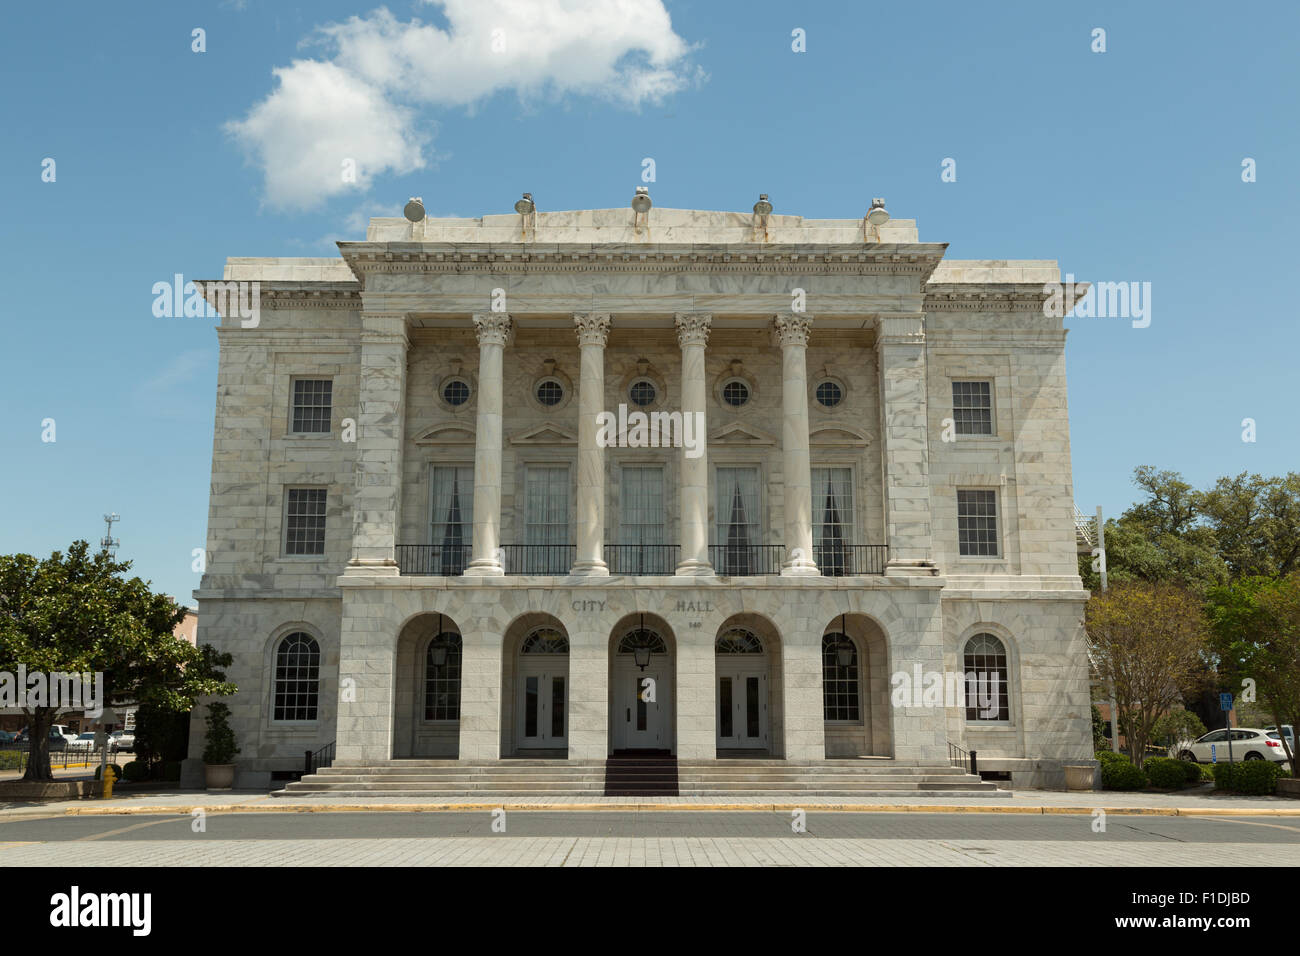 A photograph of City Hall in downtown Biloxi, Mississippi, USA. Stock Photo